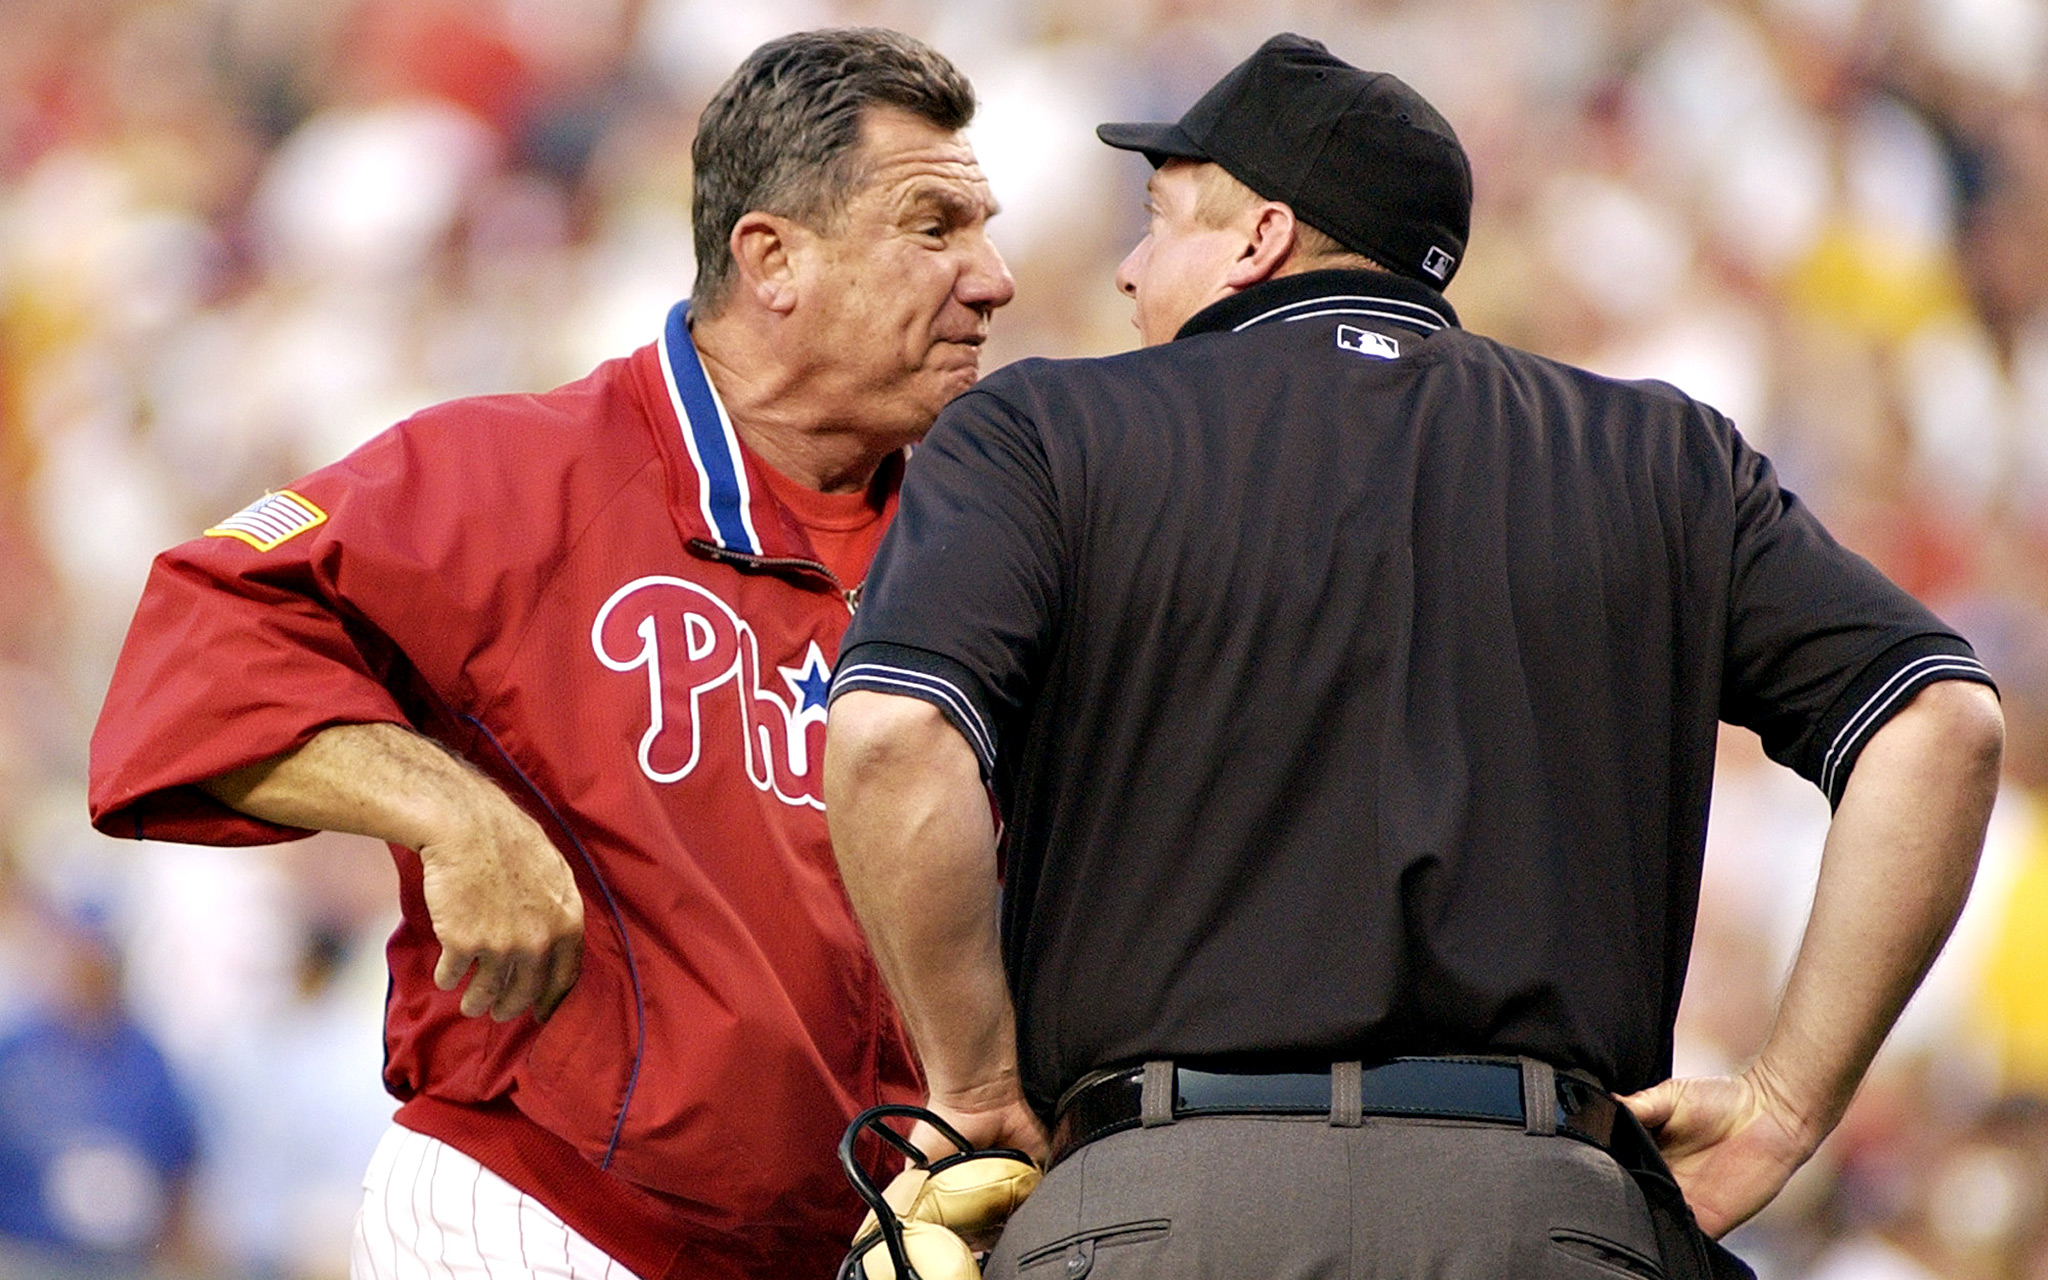 After 48 years of undeniable passion, indisputable success, Lou Piniella  waves goodbye to baseball 